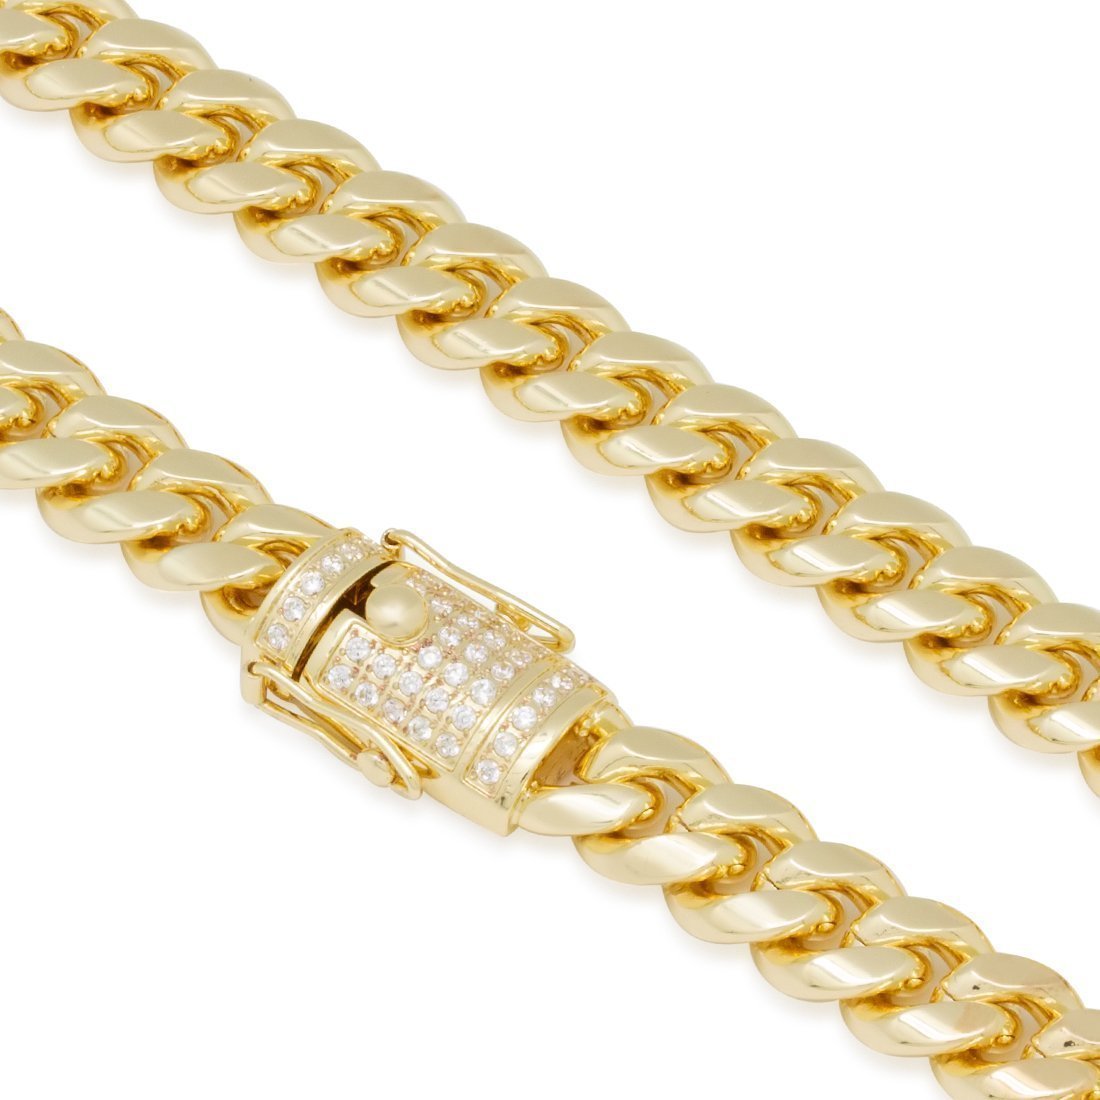 12mm Multicolored cuban link chain